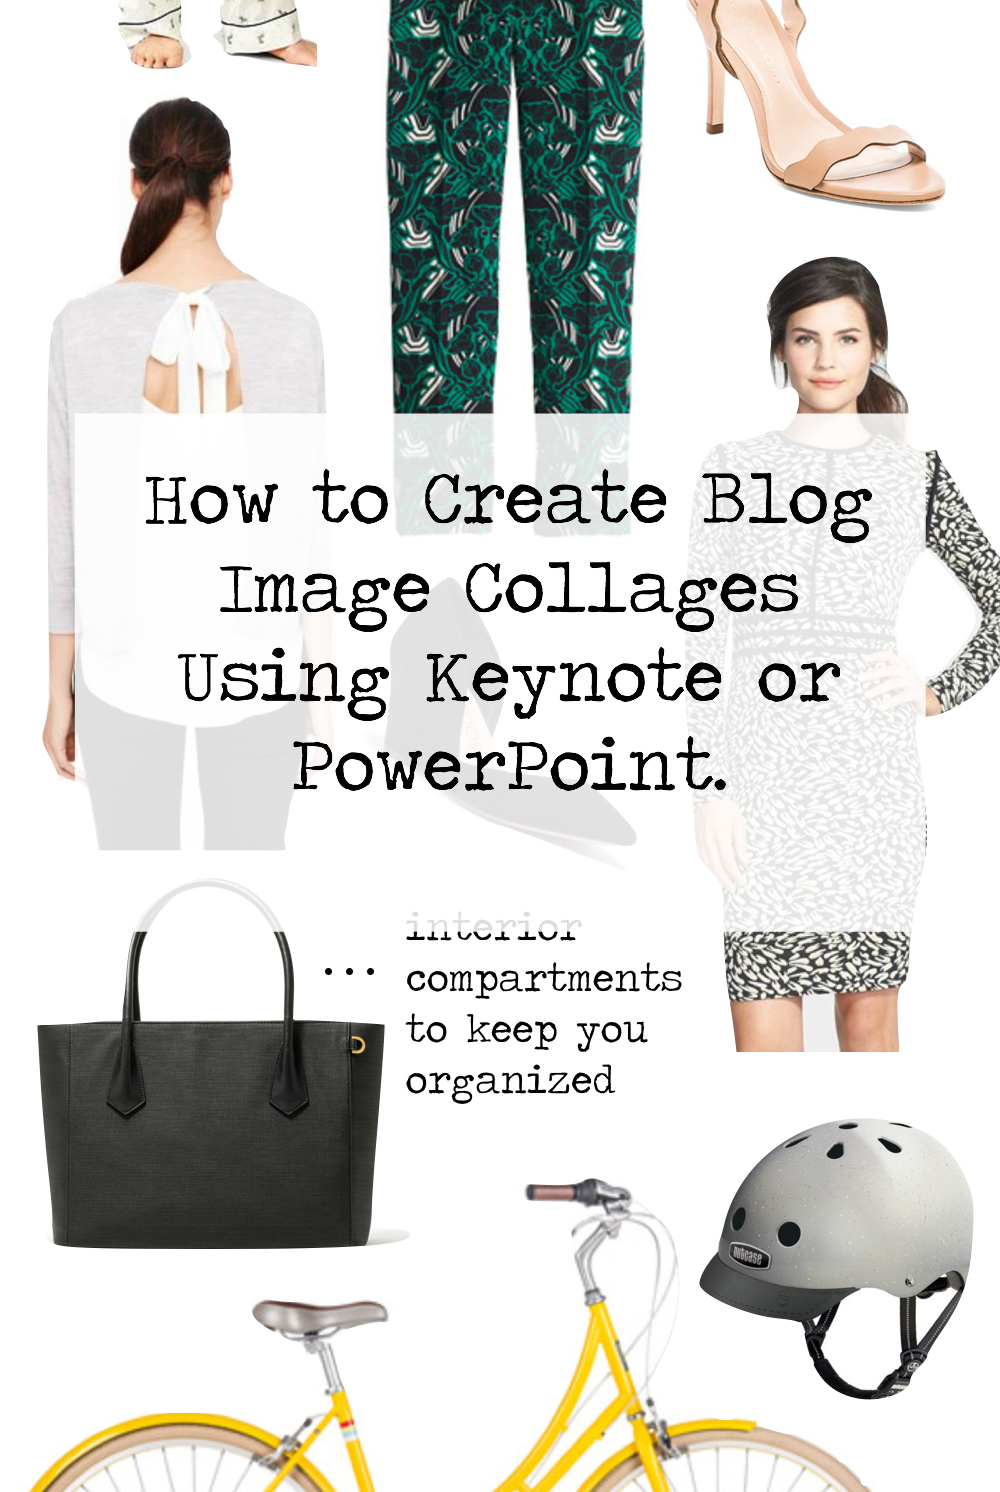 How to Create Blog Image Collages Using Keynote or PowerPoint.